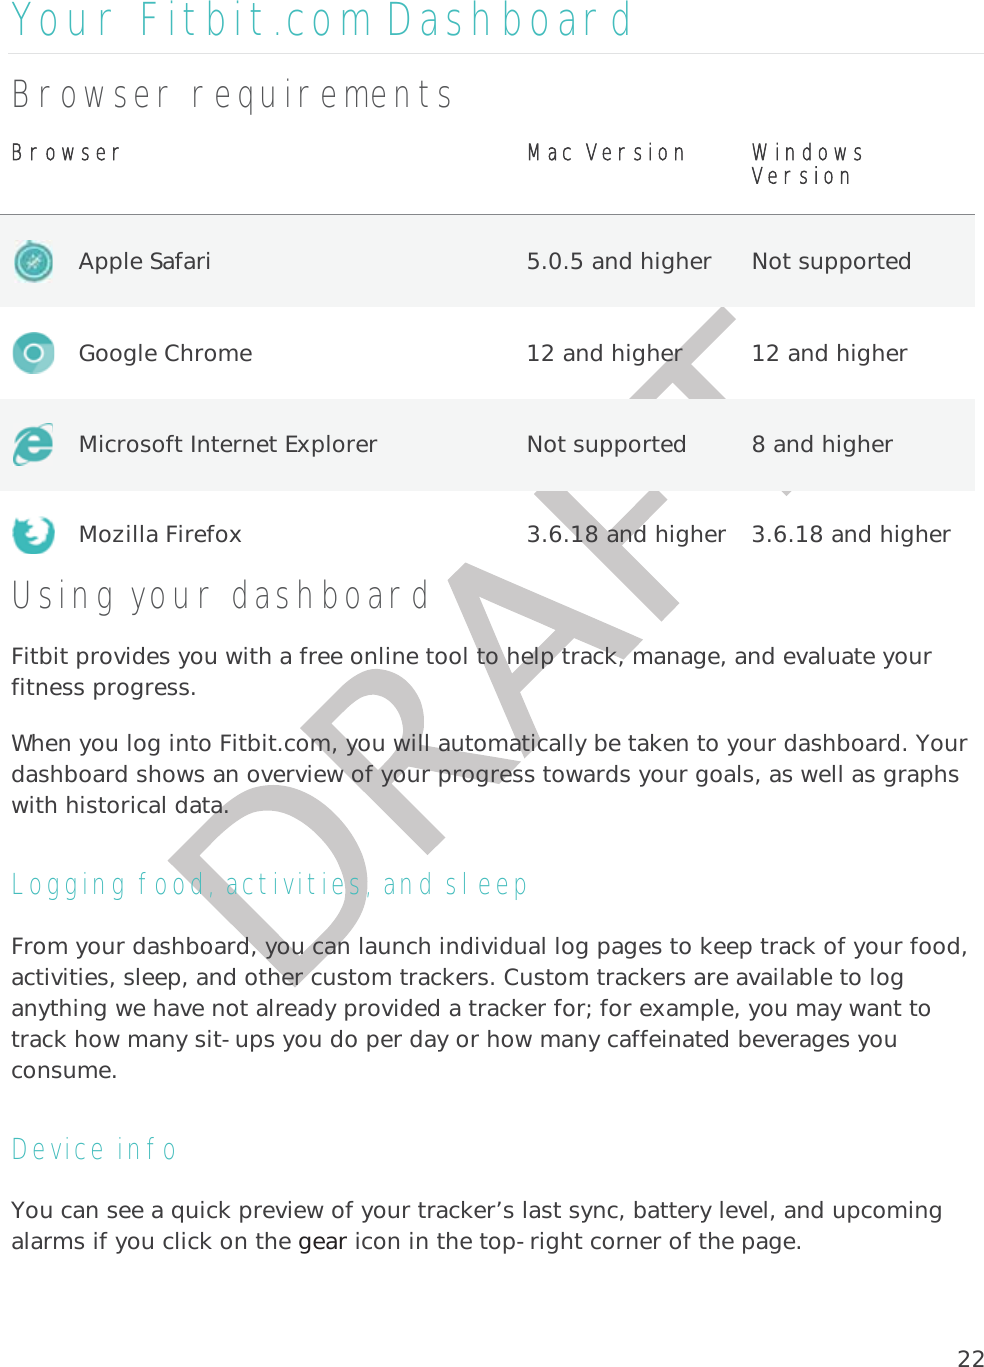 22Your Fitbit.com Dashboard Browser requirements BBrowser   MMac Version WWindows Version  Apple Safari  5.0.5 and higher  Not supported  Google Chrome  12 and higher  12 and higher  Microsoft Internet Explorer  Not supported  8 and higher  Mozilla Firefox  3.6.18 and higher  3.6.18 and higher Using your dashboard Fitbit provides you with a free online tool to help track, manage, and evaluate your fitness progress. When you log into Fitbit.com, you will automatically be taken to your dashboard. Your dashboard shows an overview of your progress towards your goals, as well as graphs with historical data.  Logging food, activities, and sleep From your dashboard, you can launch individual log pages to keep track of your food, activities, sleep, and other custom trackers. Custom trackers are available to log anything we have not already provided a tracker for; for example, you may want to track how many sit-ups you do per day or how many caffeinated beverages you consume.  Device info  You can see a quick preview of your tracker’s last sync, battery level, and upcoming alarms if you click on the gear icon in the top-right corner of the page. 